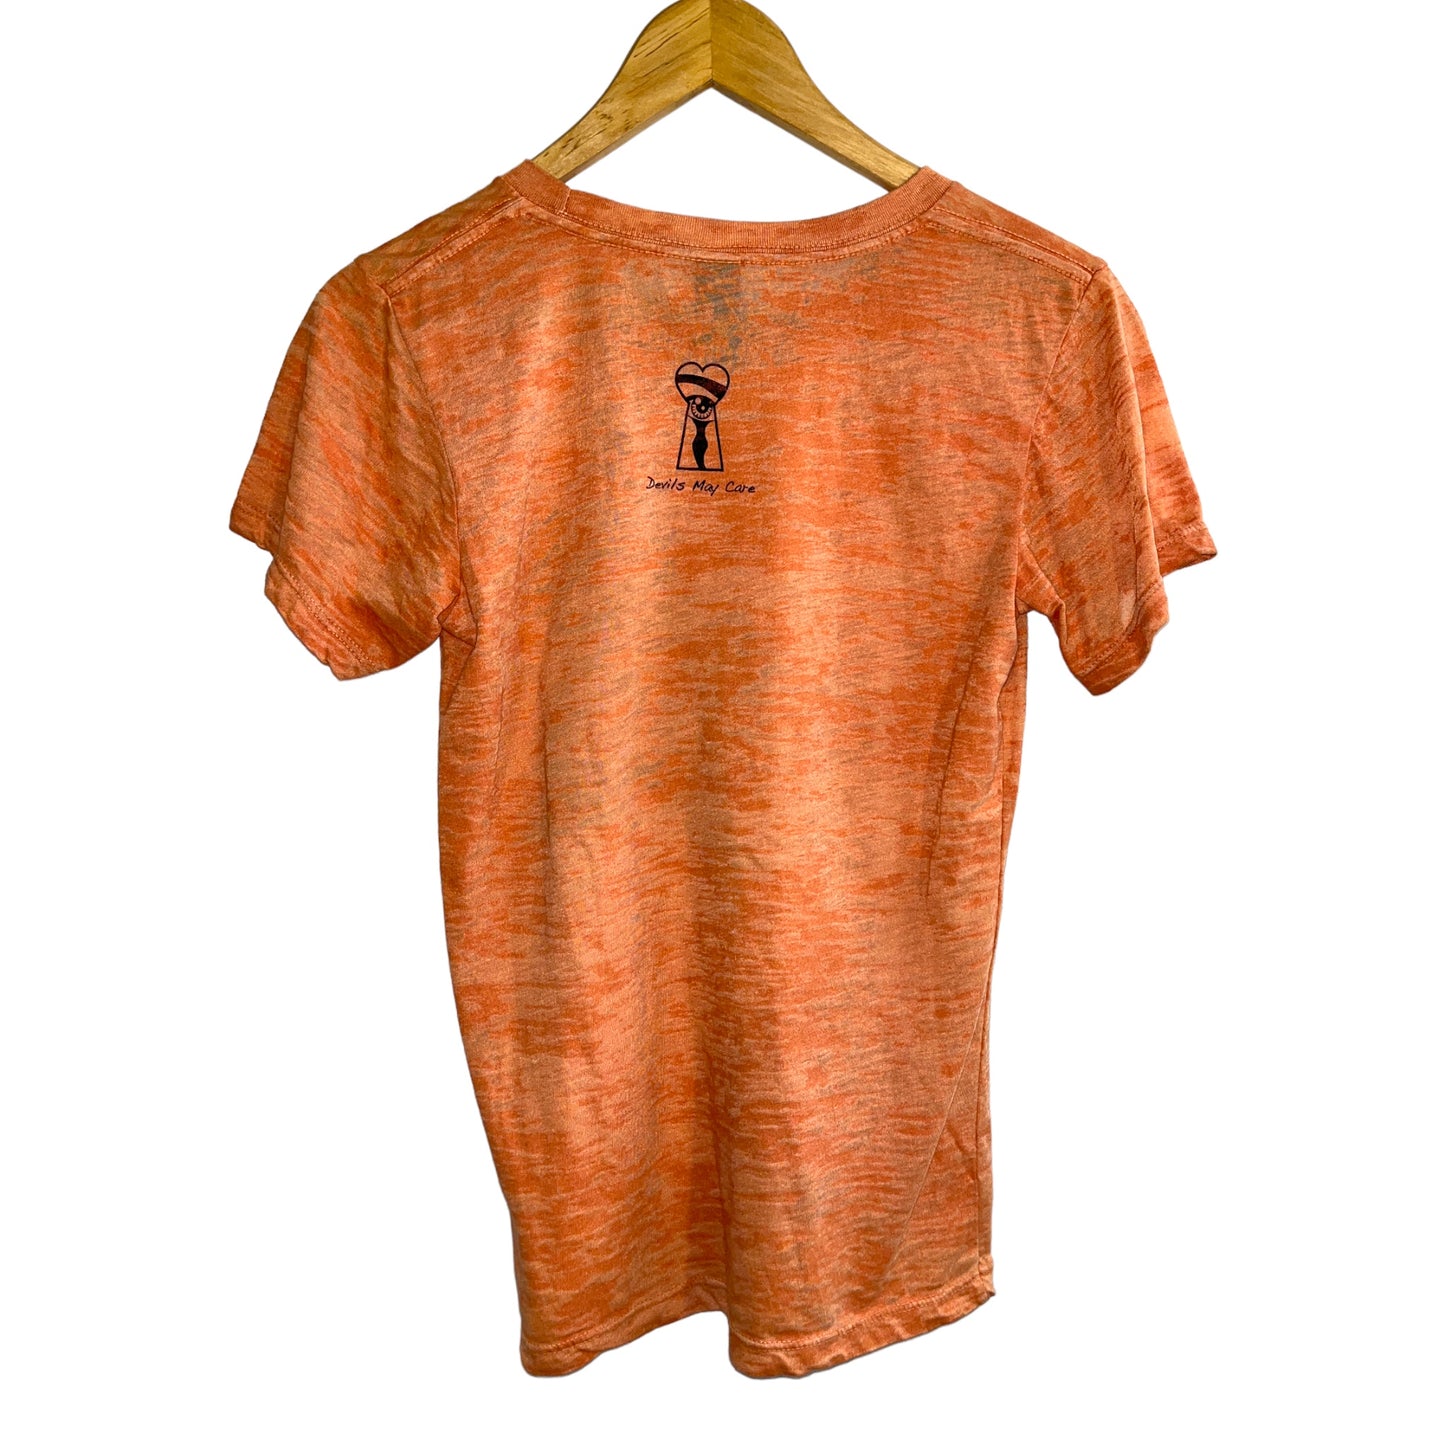 Porn Star - Orange Crew Neck T-shirt - Size MD - by Devils May Care